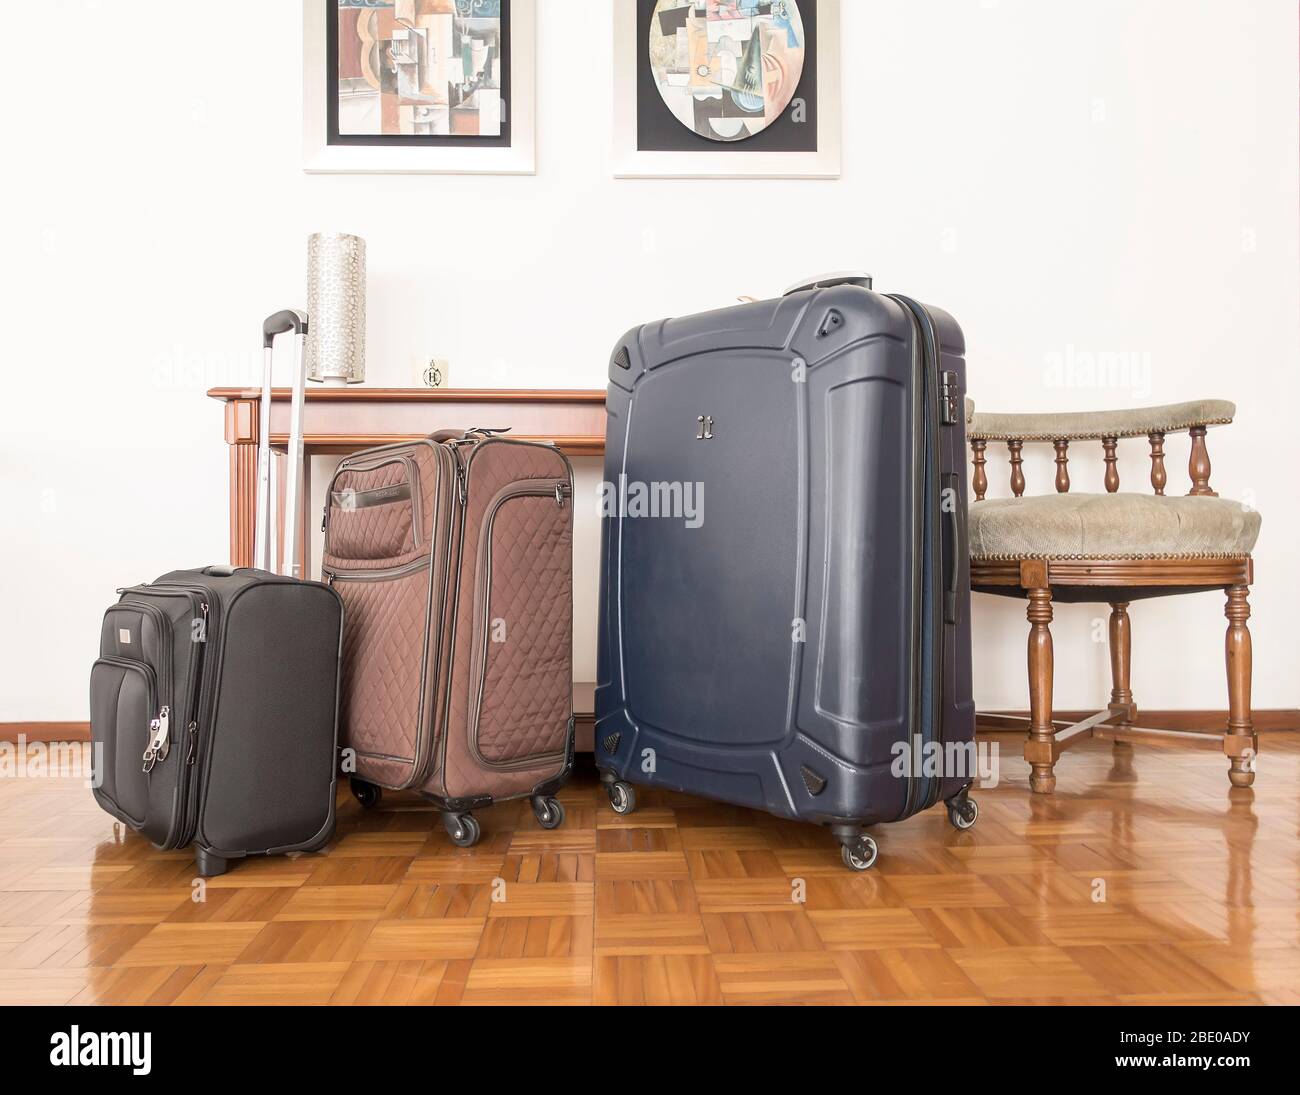 Suitcases at home Stock Photo